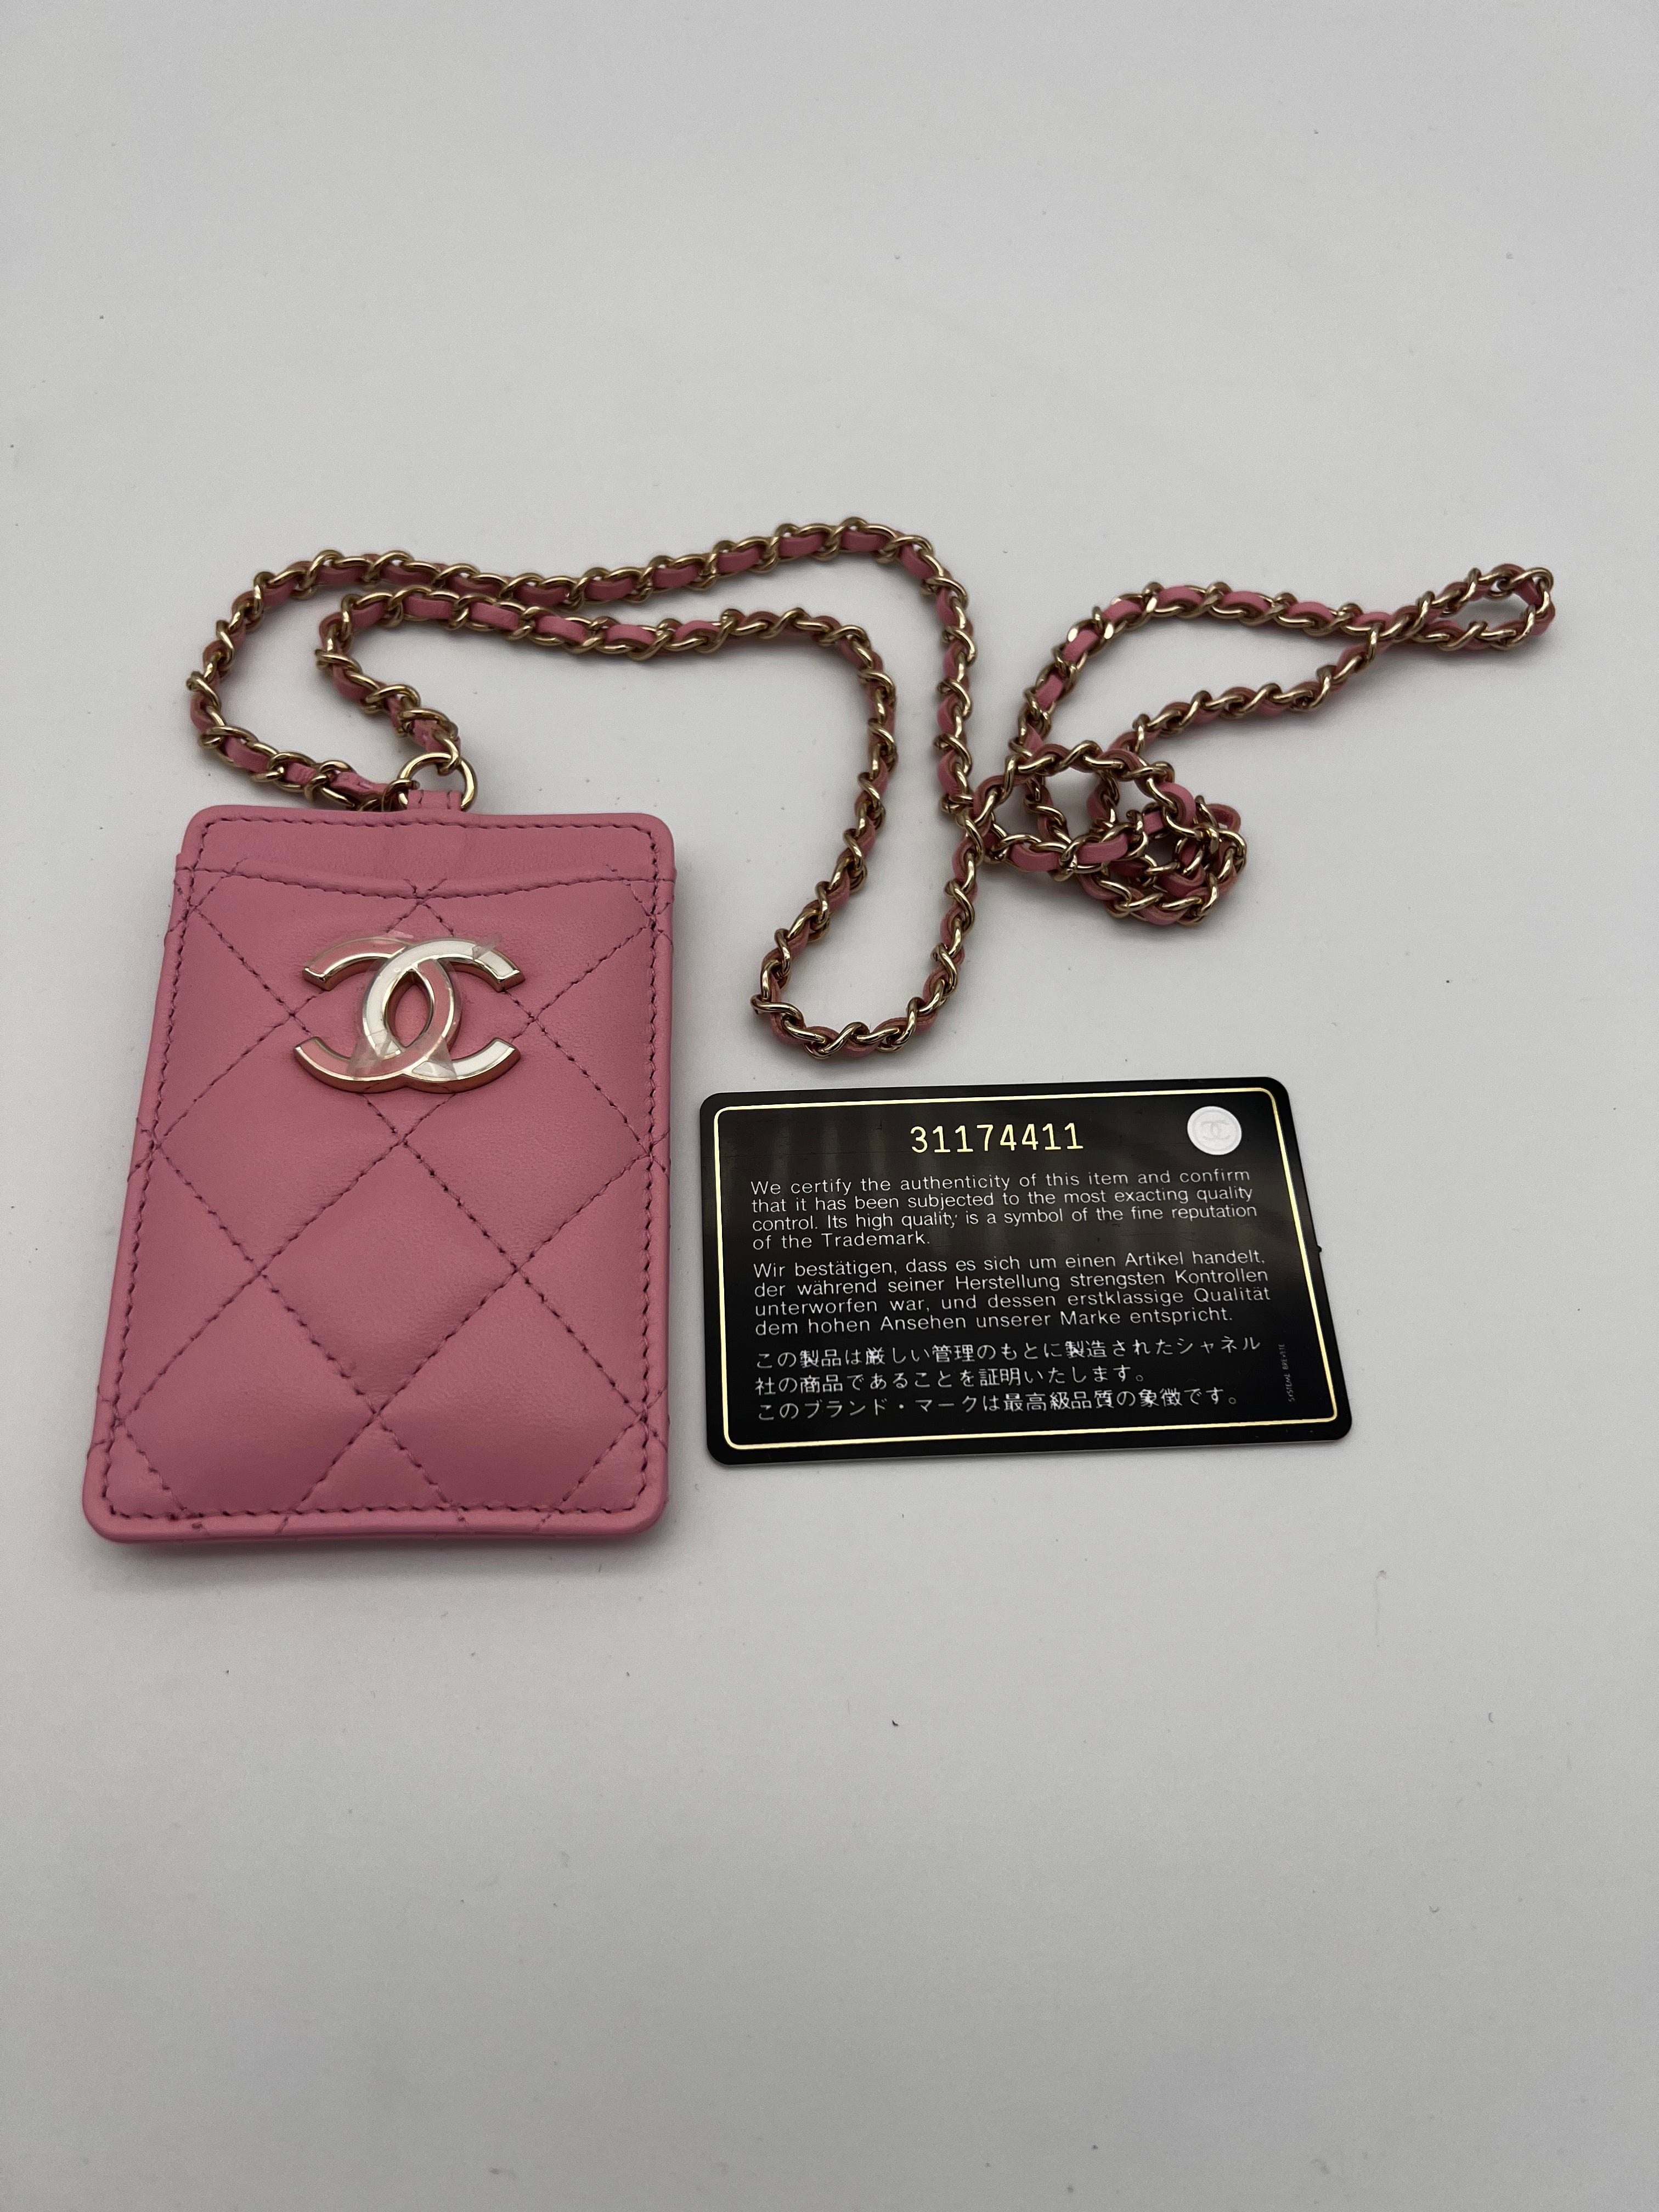 Authentic Chanel Lanyard Card Holder with Chain